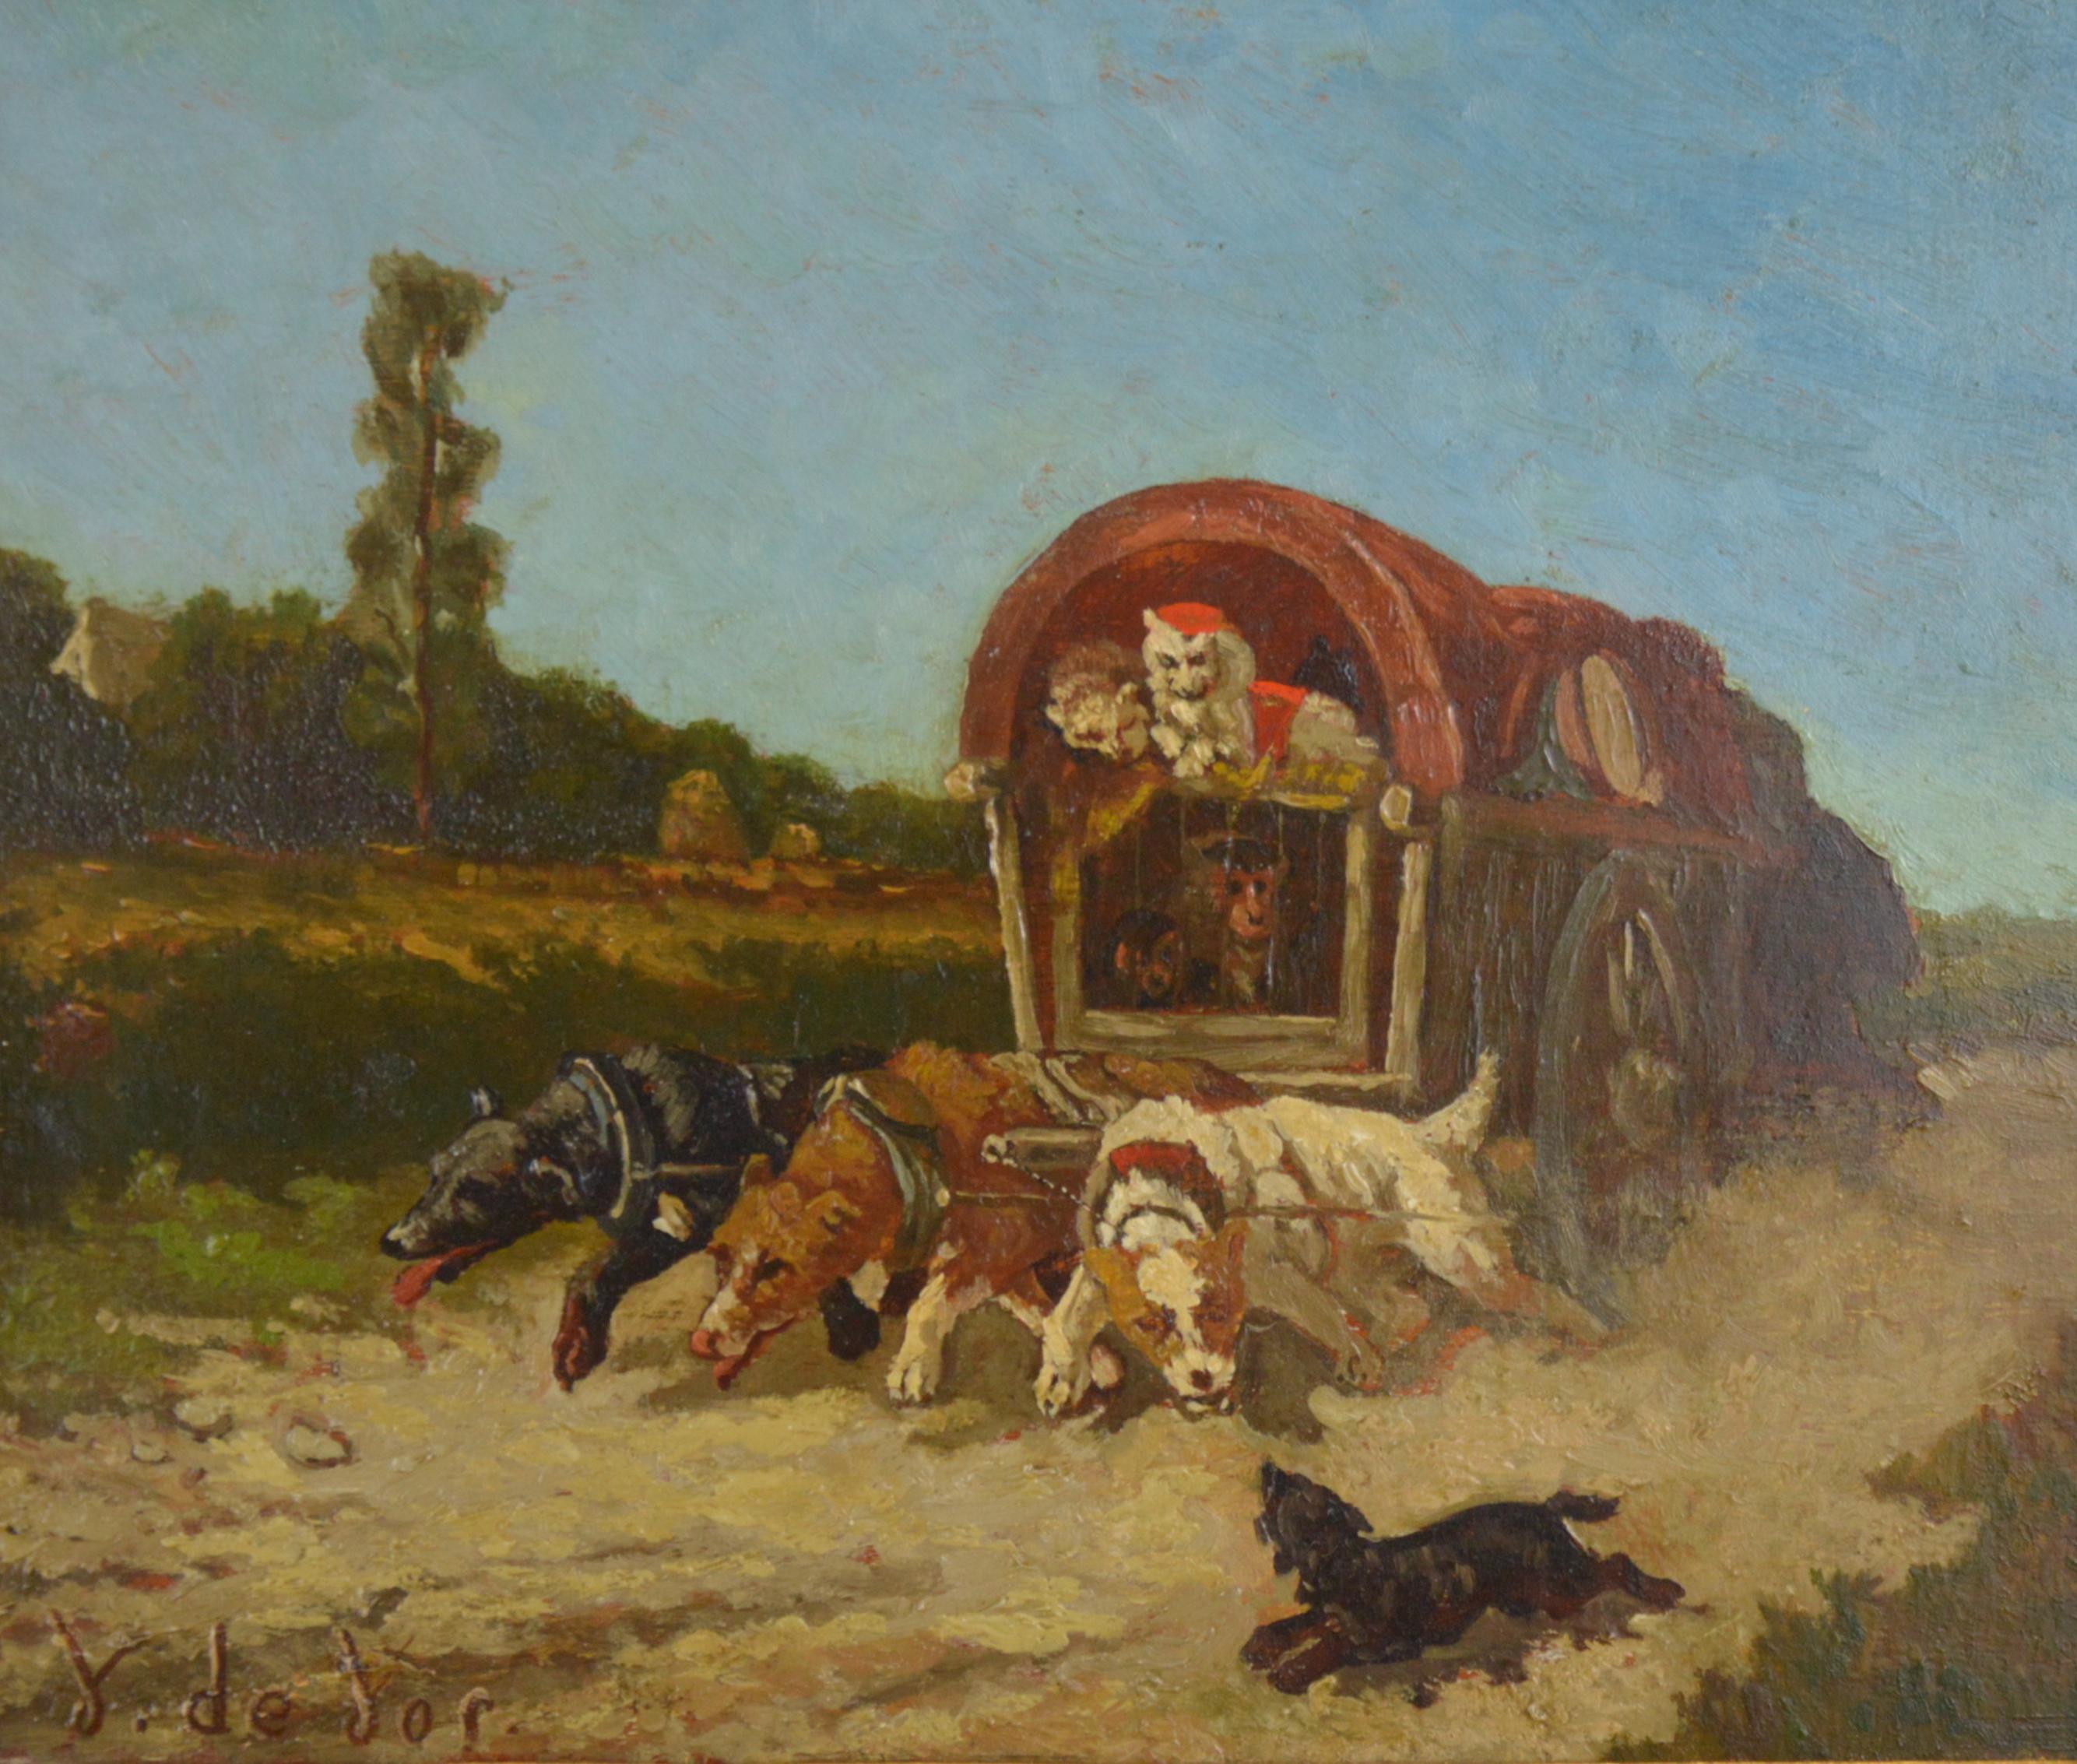 Vincent De Vos (1829-1875). Painting - carriage with a team of dogs, 19th century.
Dimensions: 31 x 25 cm (painting), 55 x 50 cm (frame). Oil on canvas.
Good condition, chips to the frame.